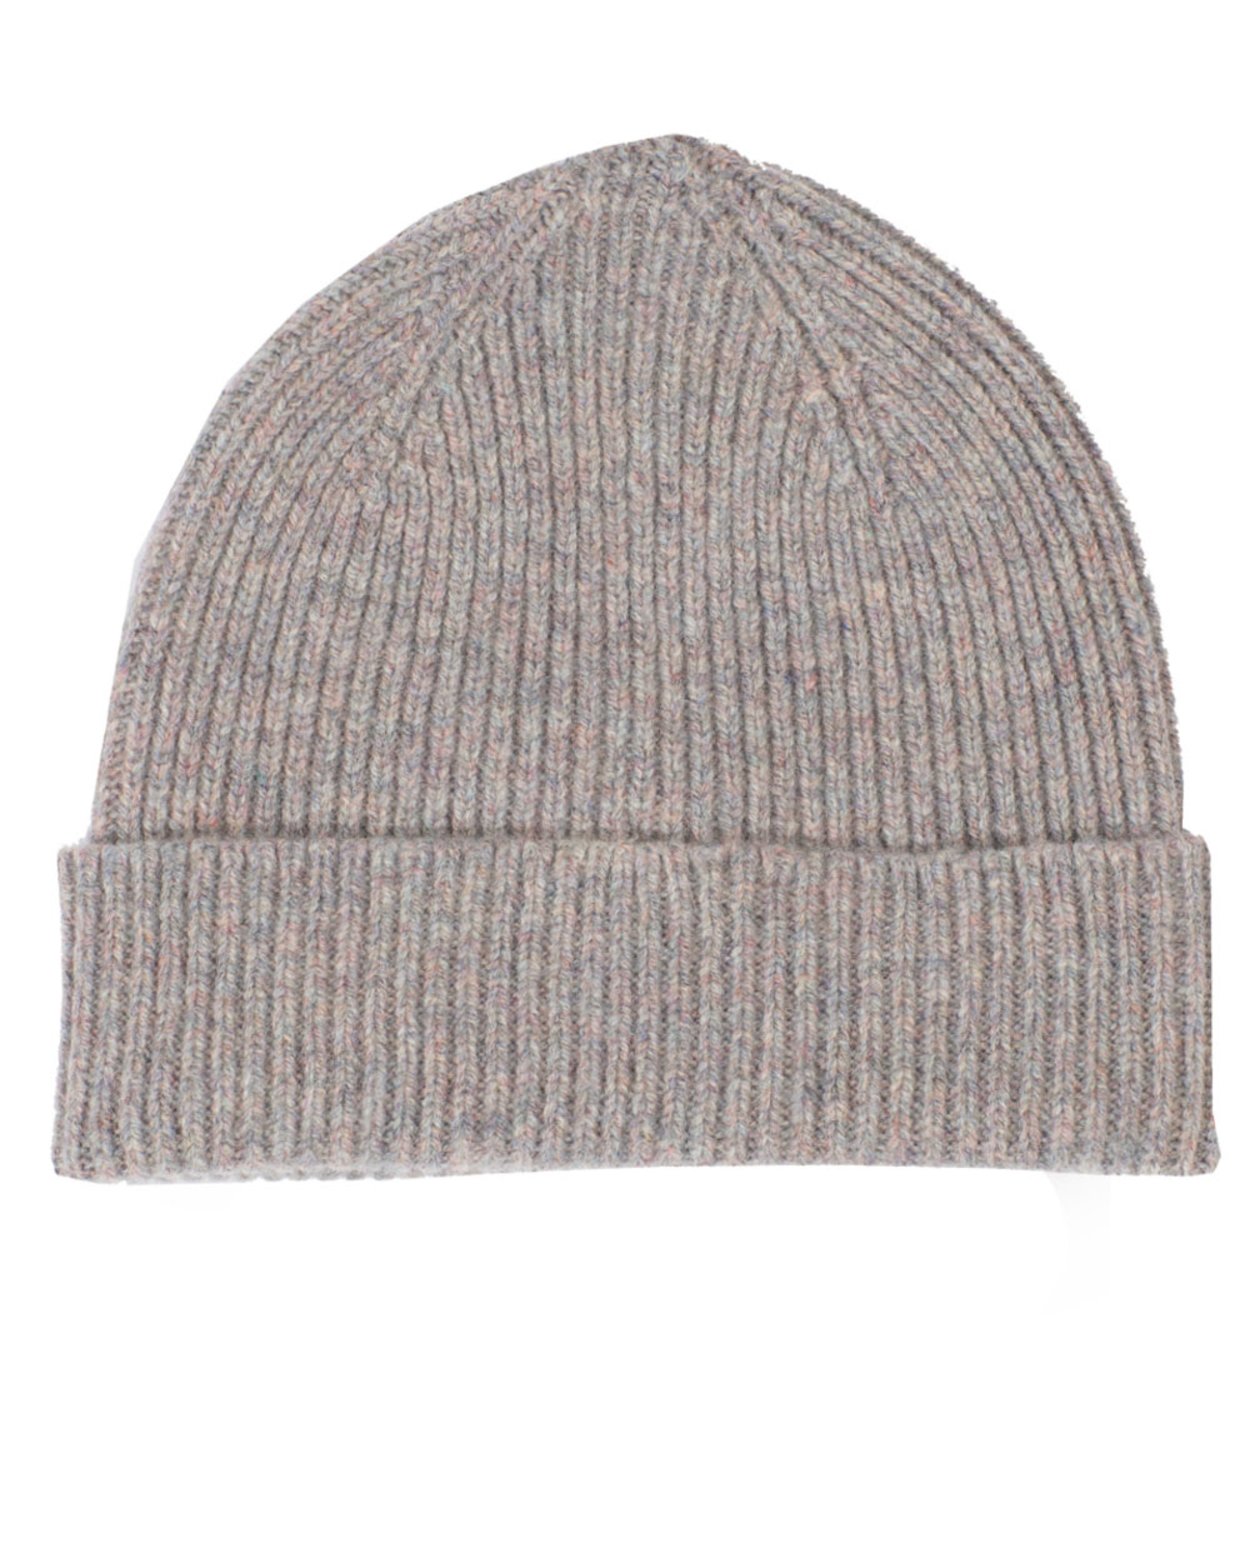 Lambswool Clyde Hat in Fusion